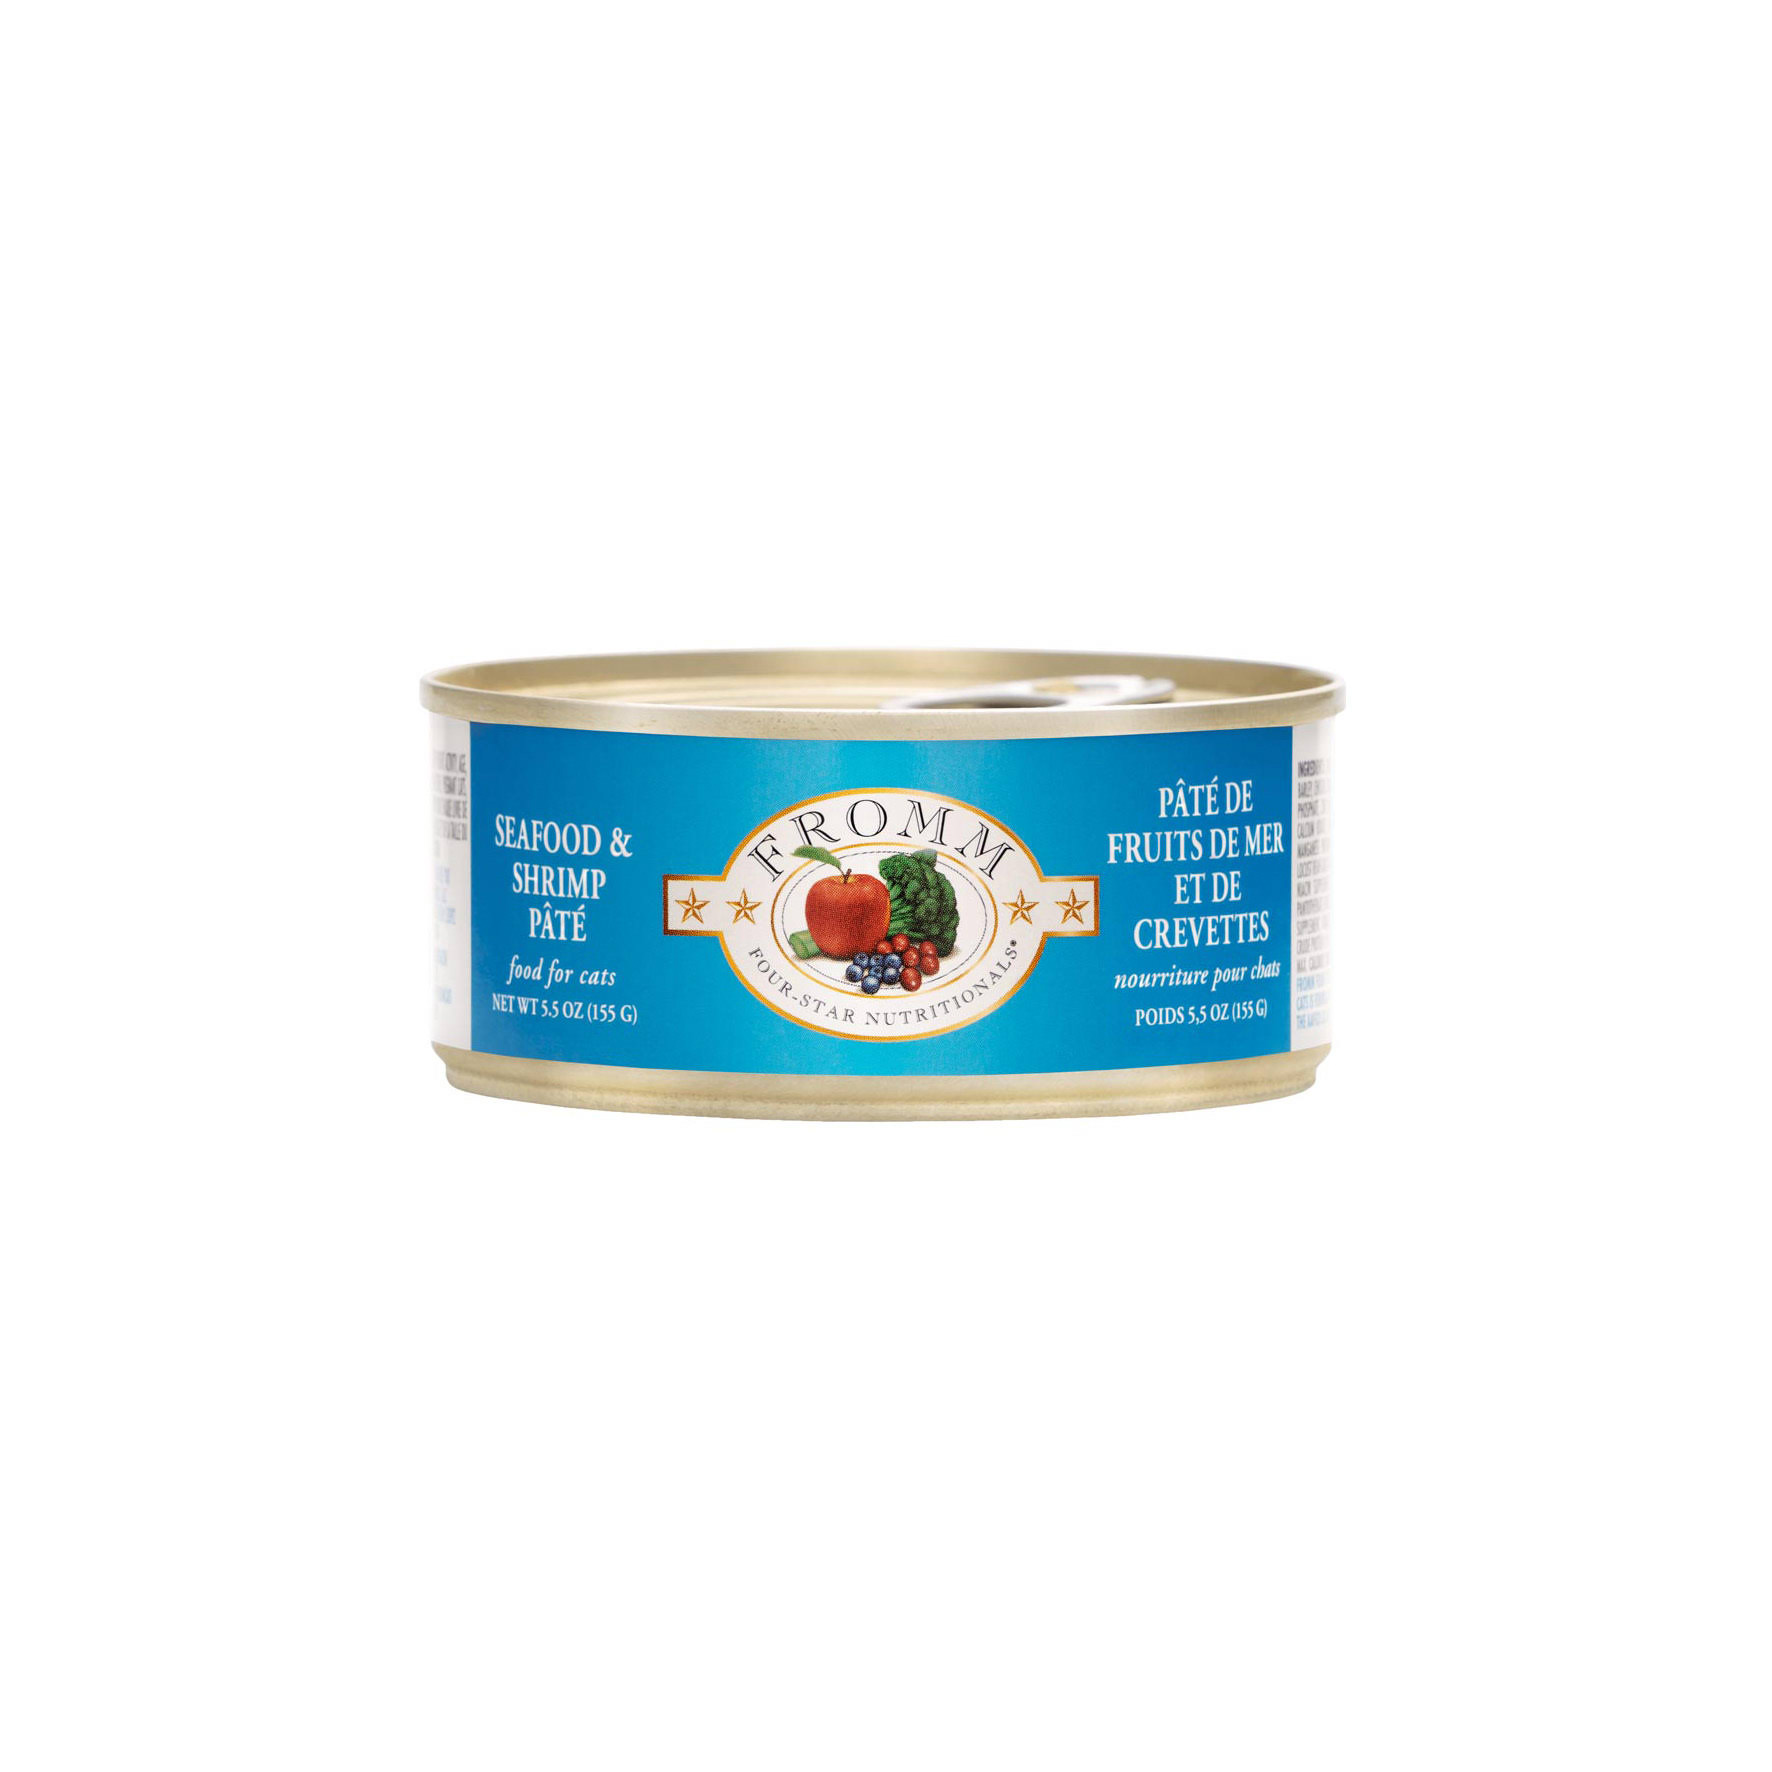 Fromm Four Star Seafood and Shrimp Pate Canned Cat Food, 5.5-oz